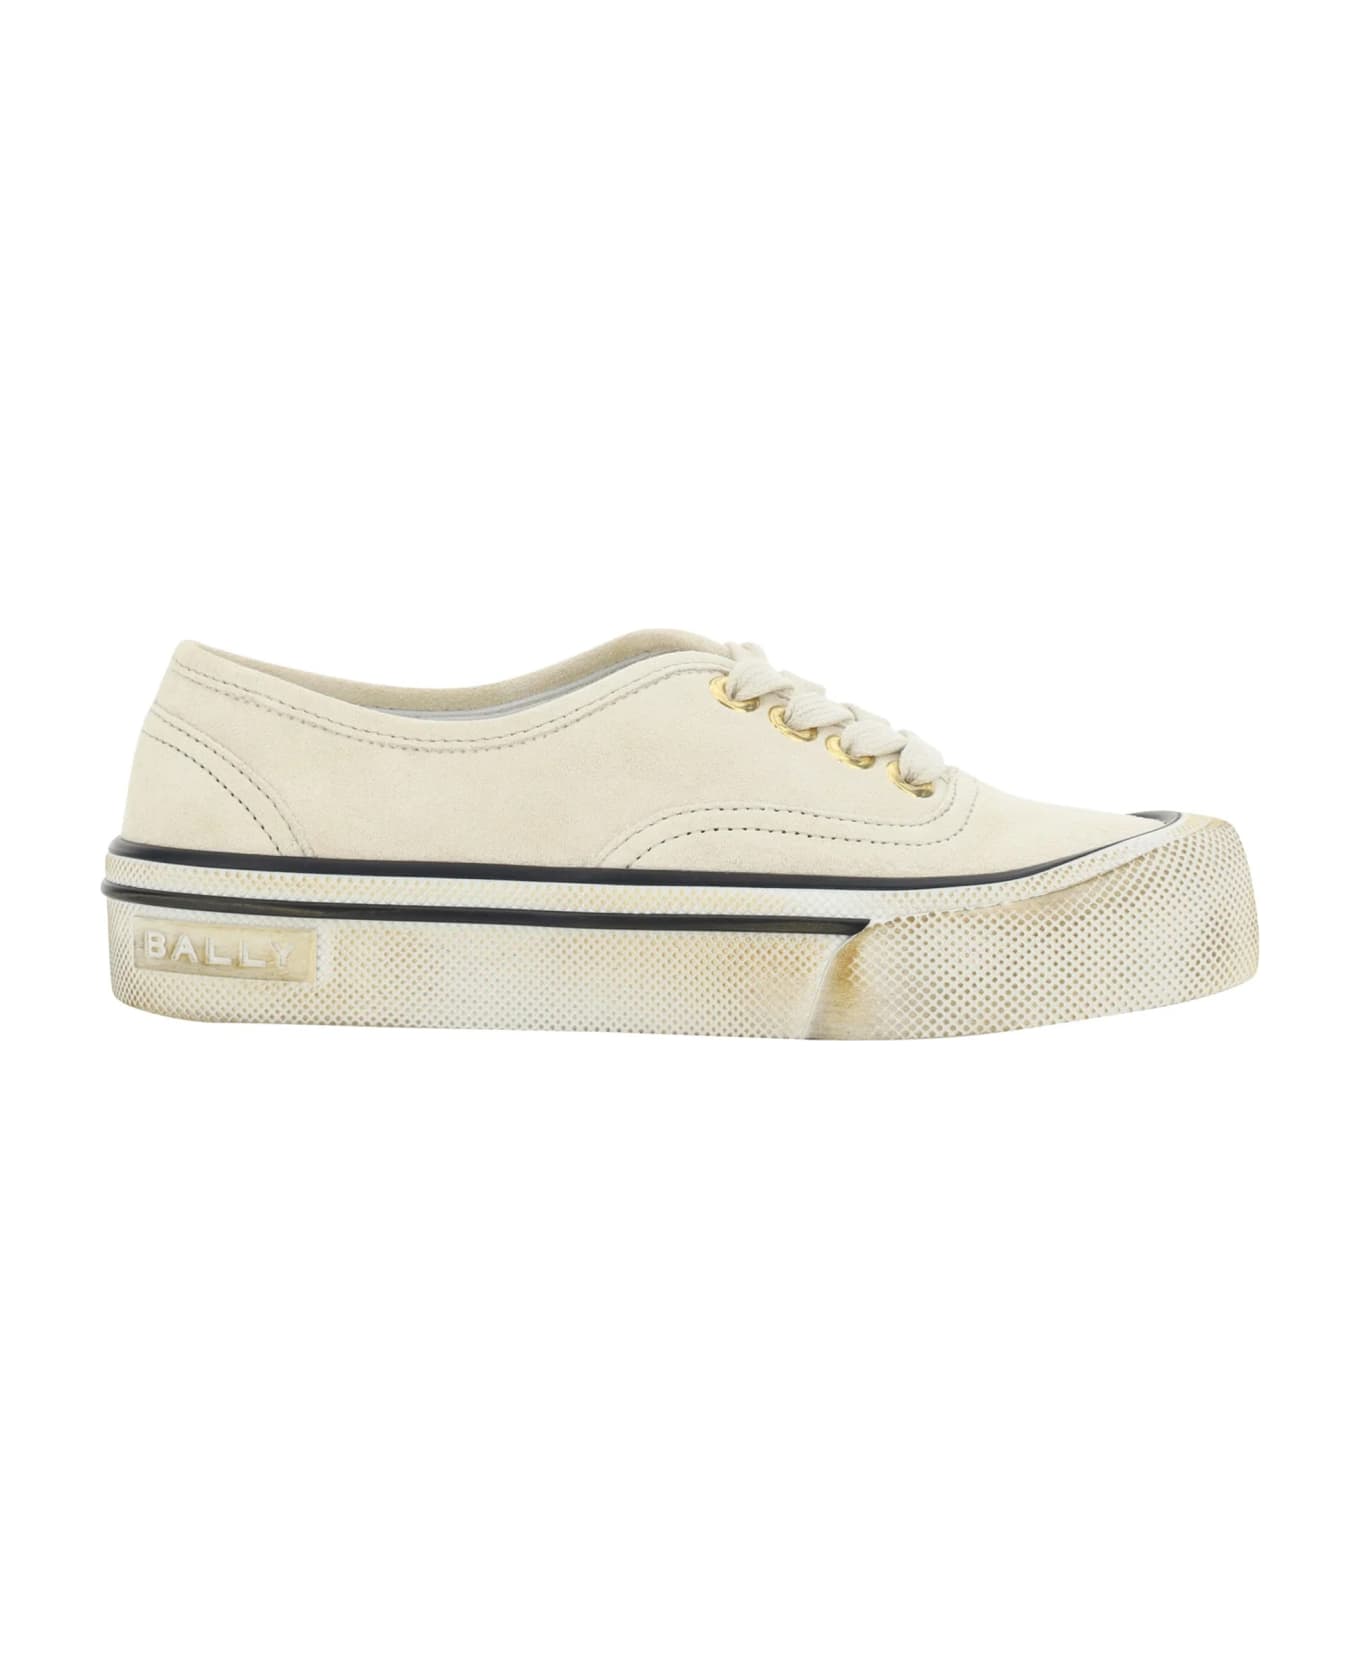 Bally Lyder Leather Sneakers - White